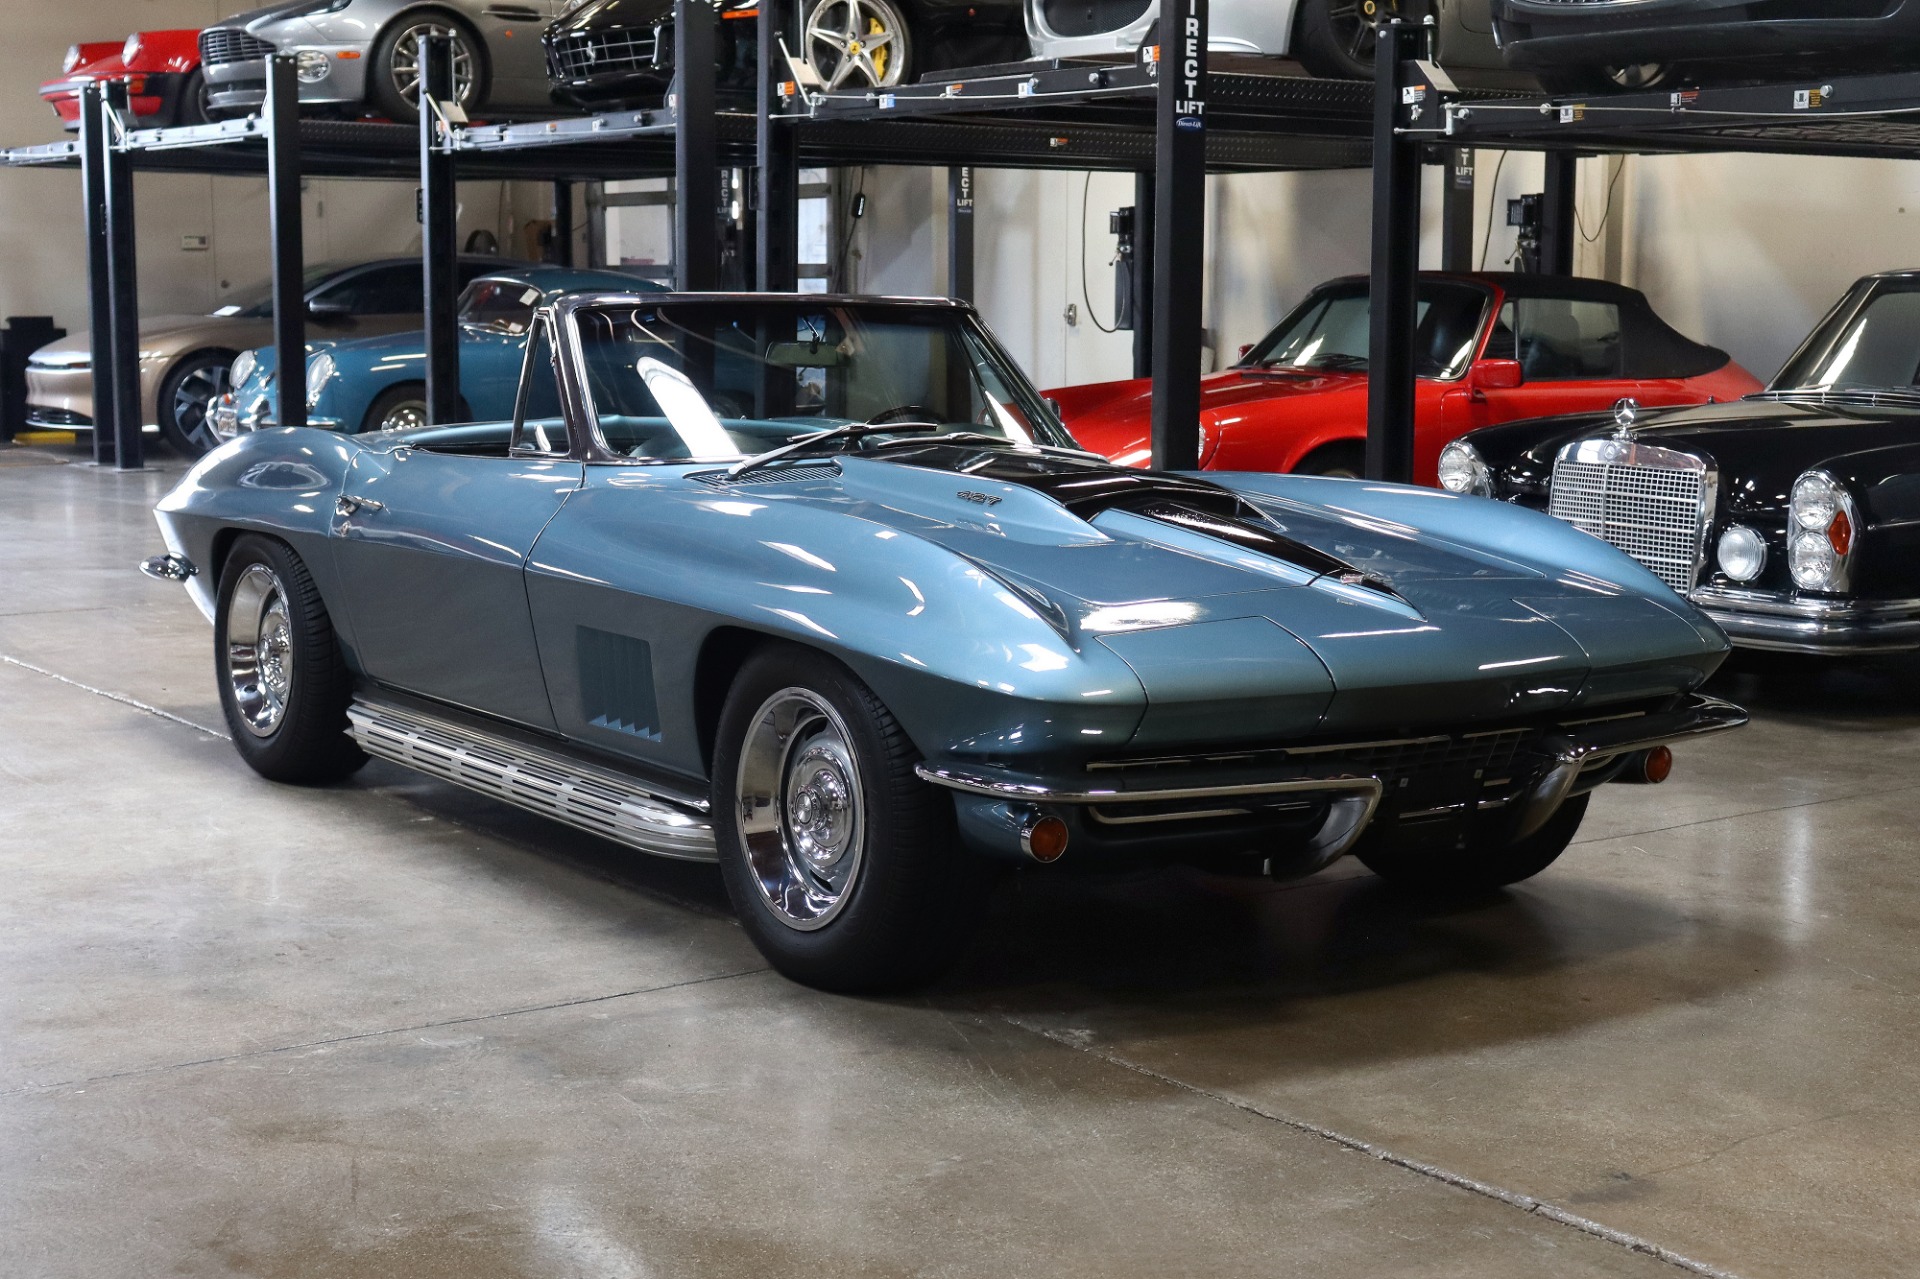 Used 1967 Chevrolet Corvette Tri power for sale $219,995 at San Francisco Sports Cars in San Carlos CA 94070 1